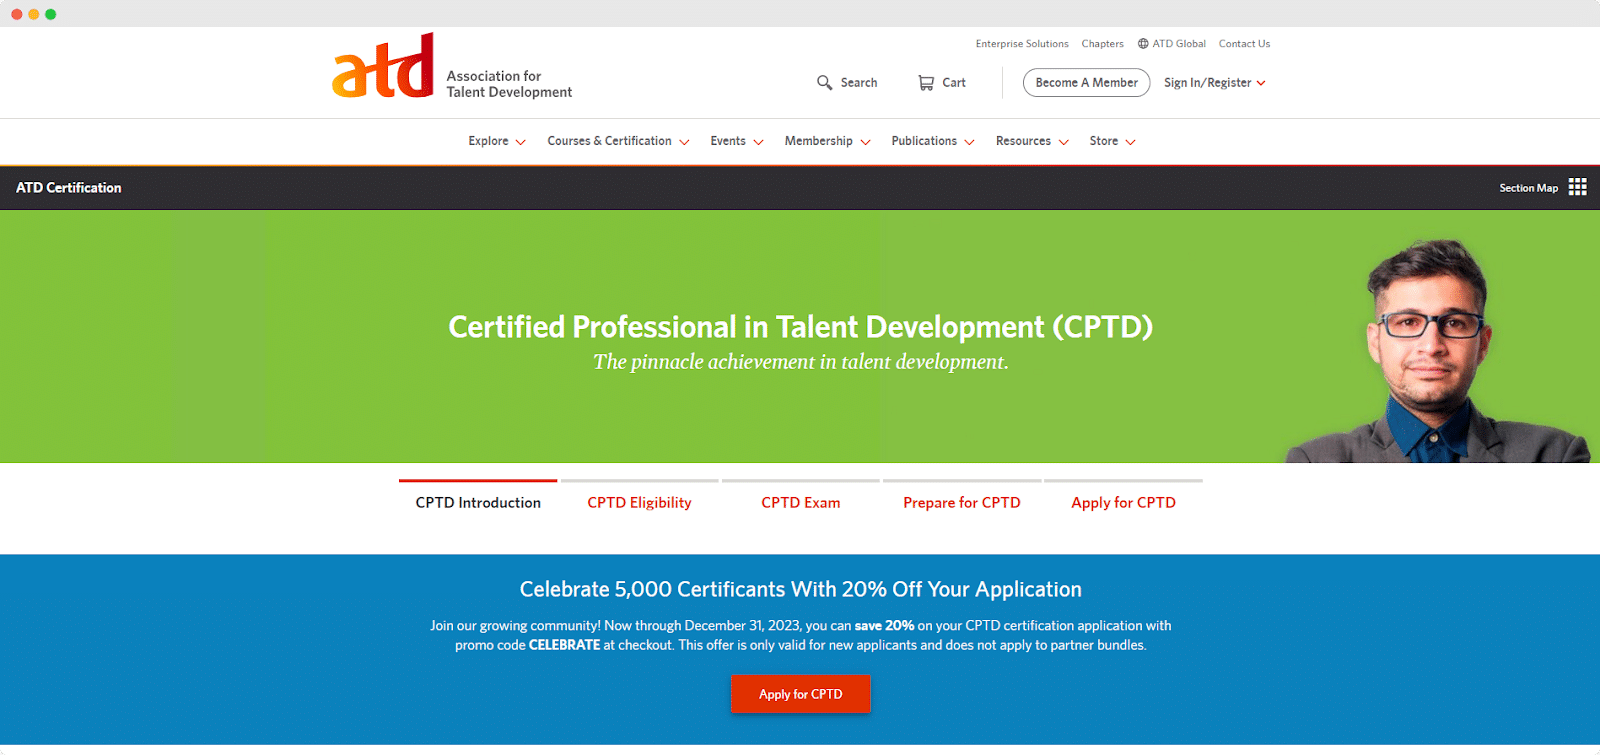 Top HR Professional Certification